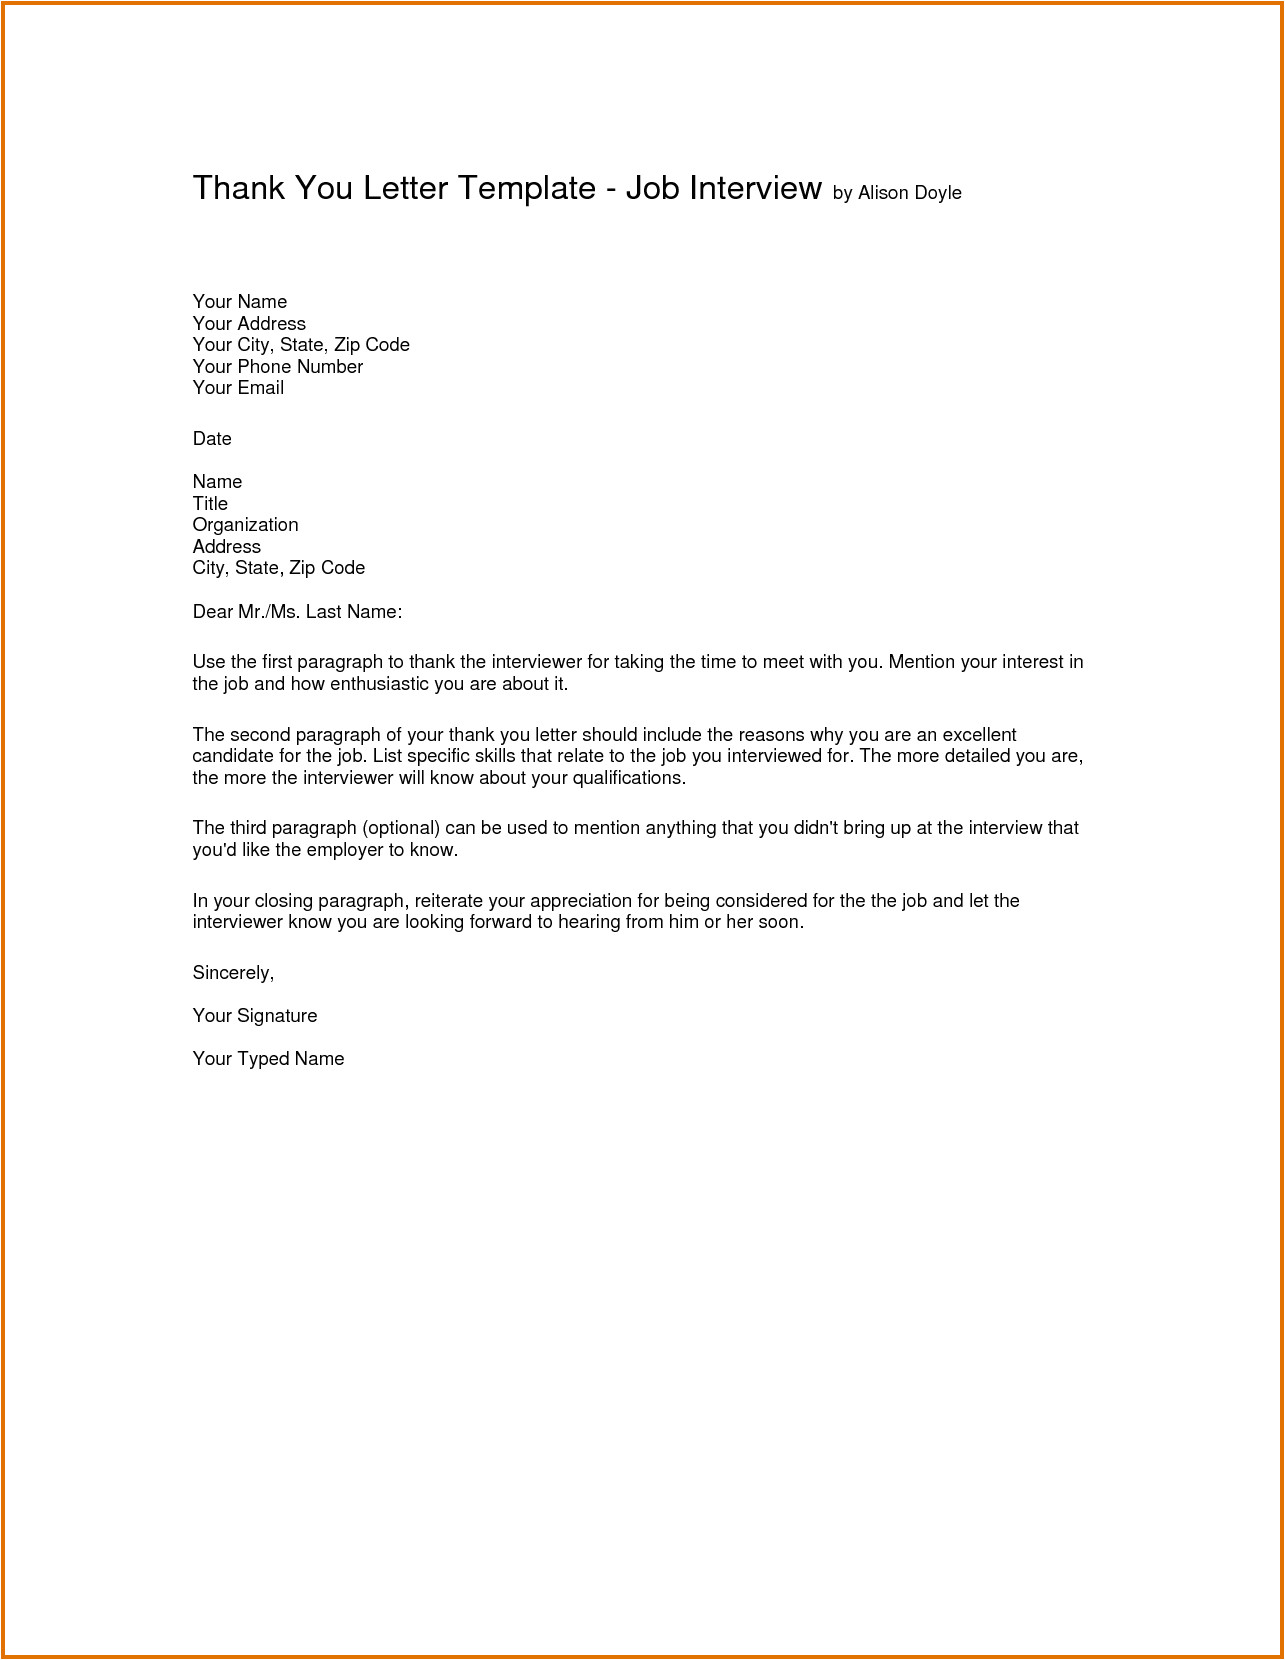 job interview cover letter